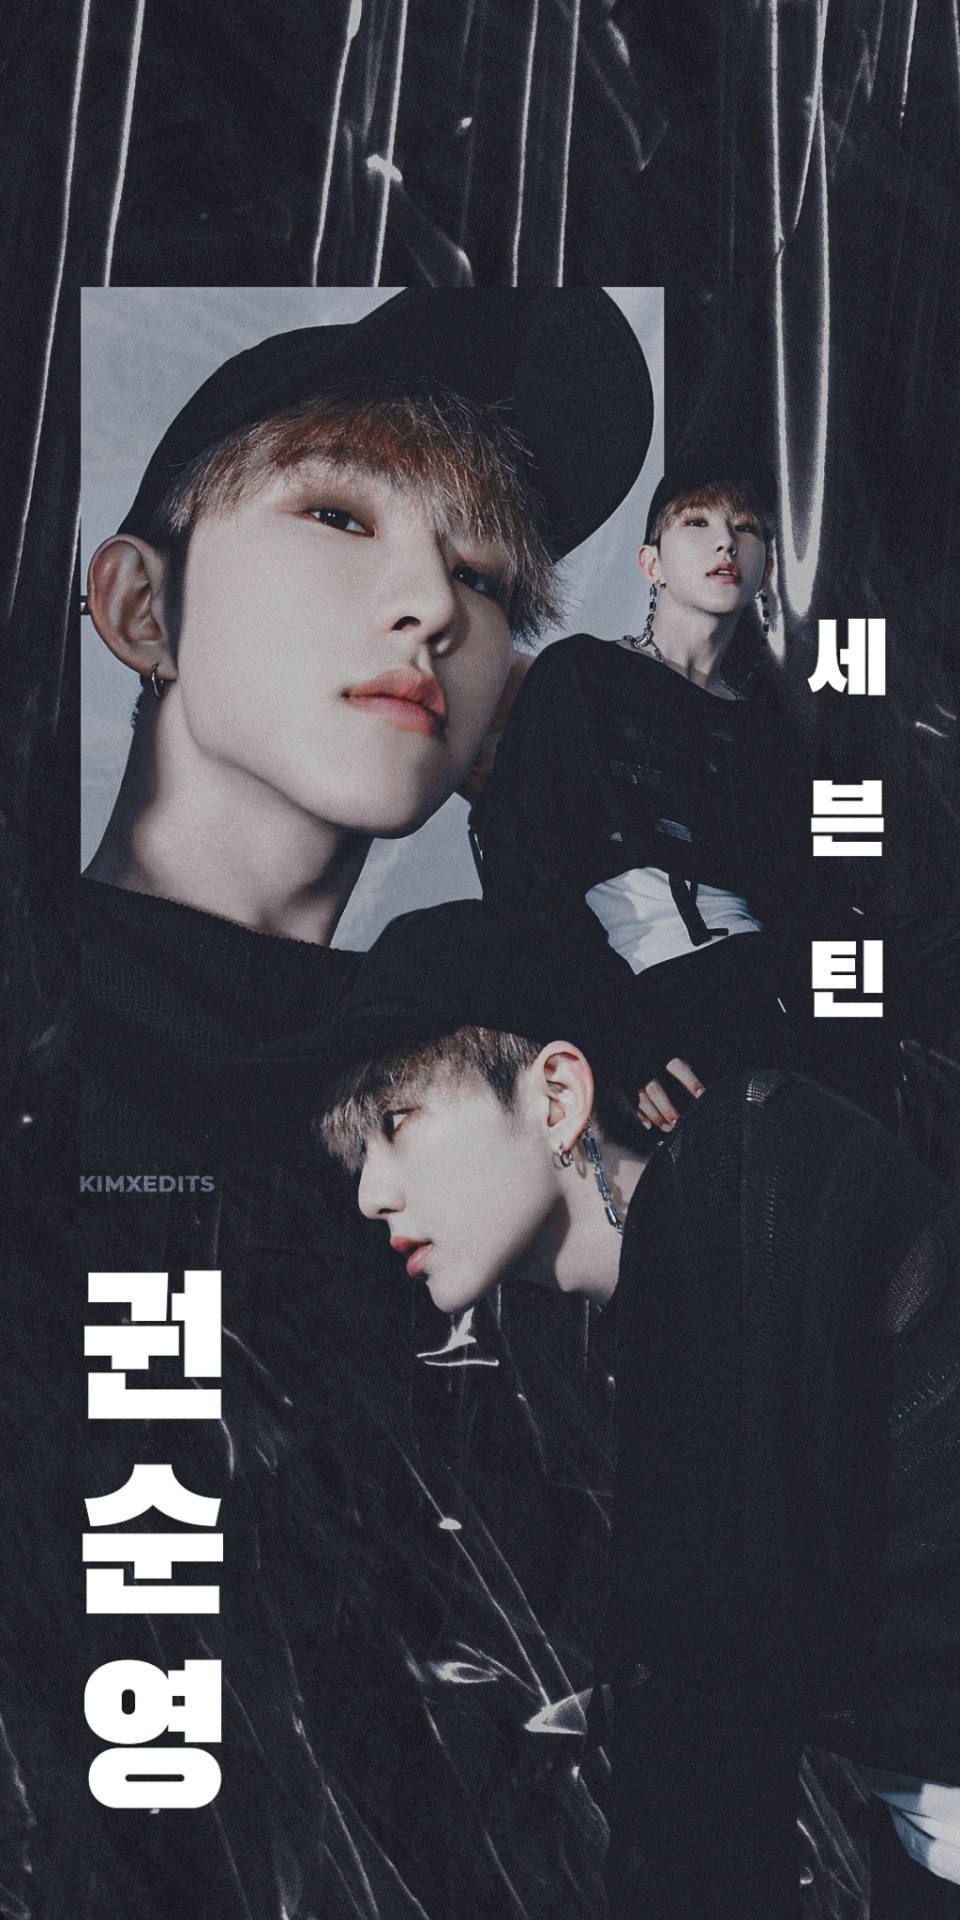 Hoshi In Black Outfit Wallpaper